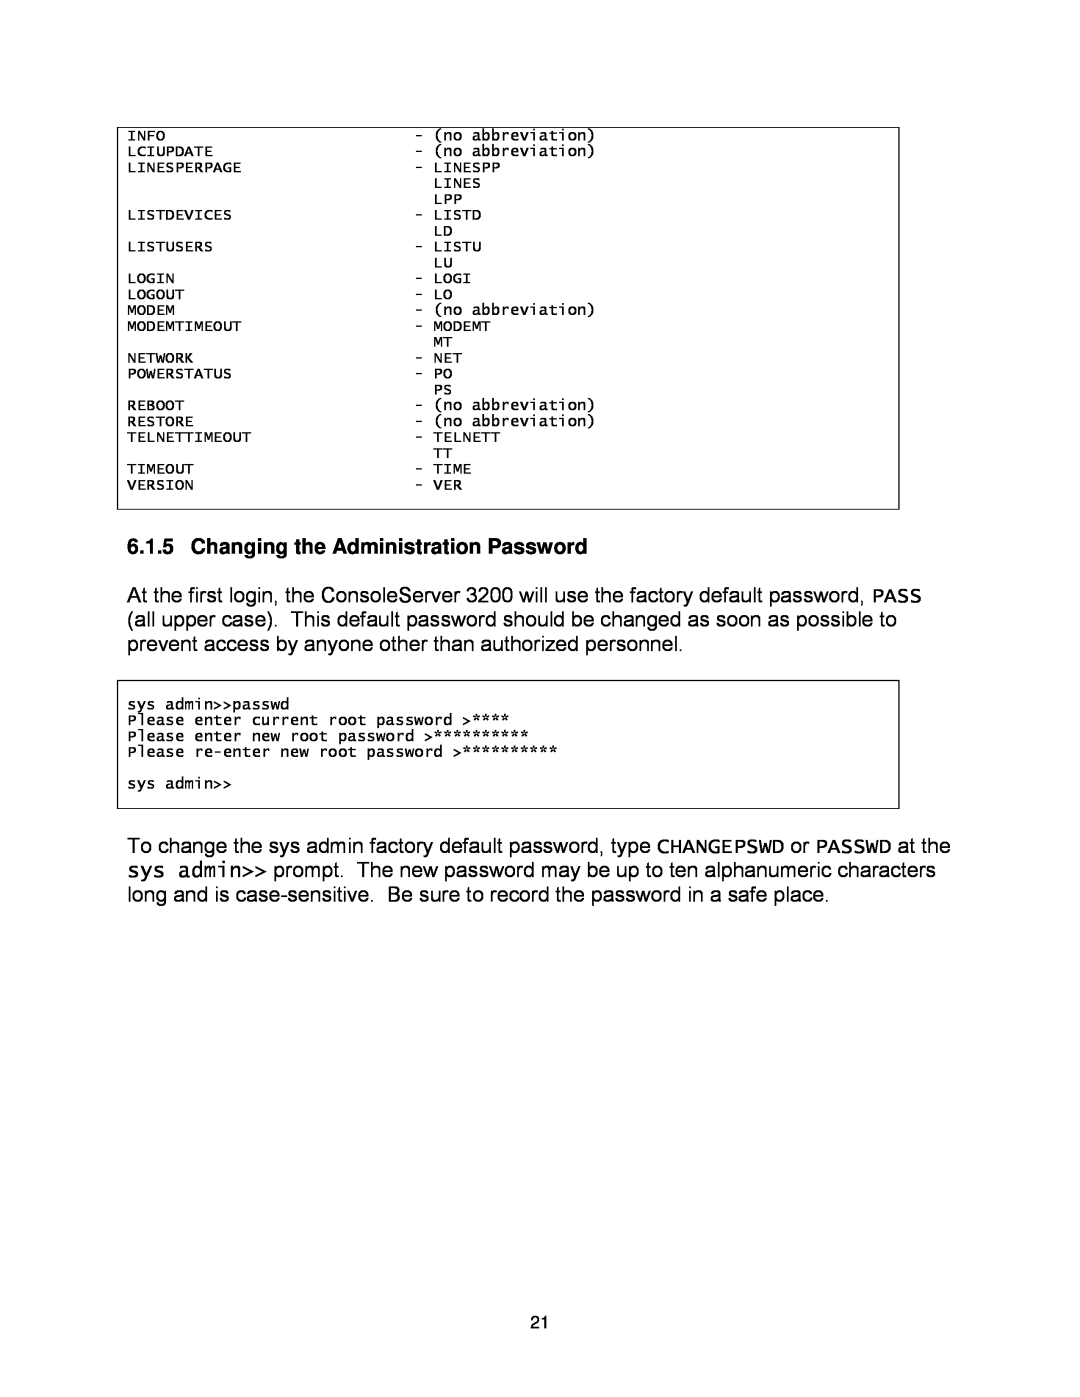 Lightwave Communications 3200 user manual Changing the Administration Password 